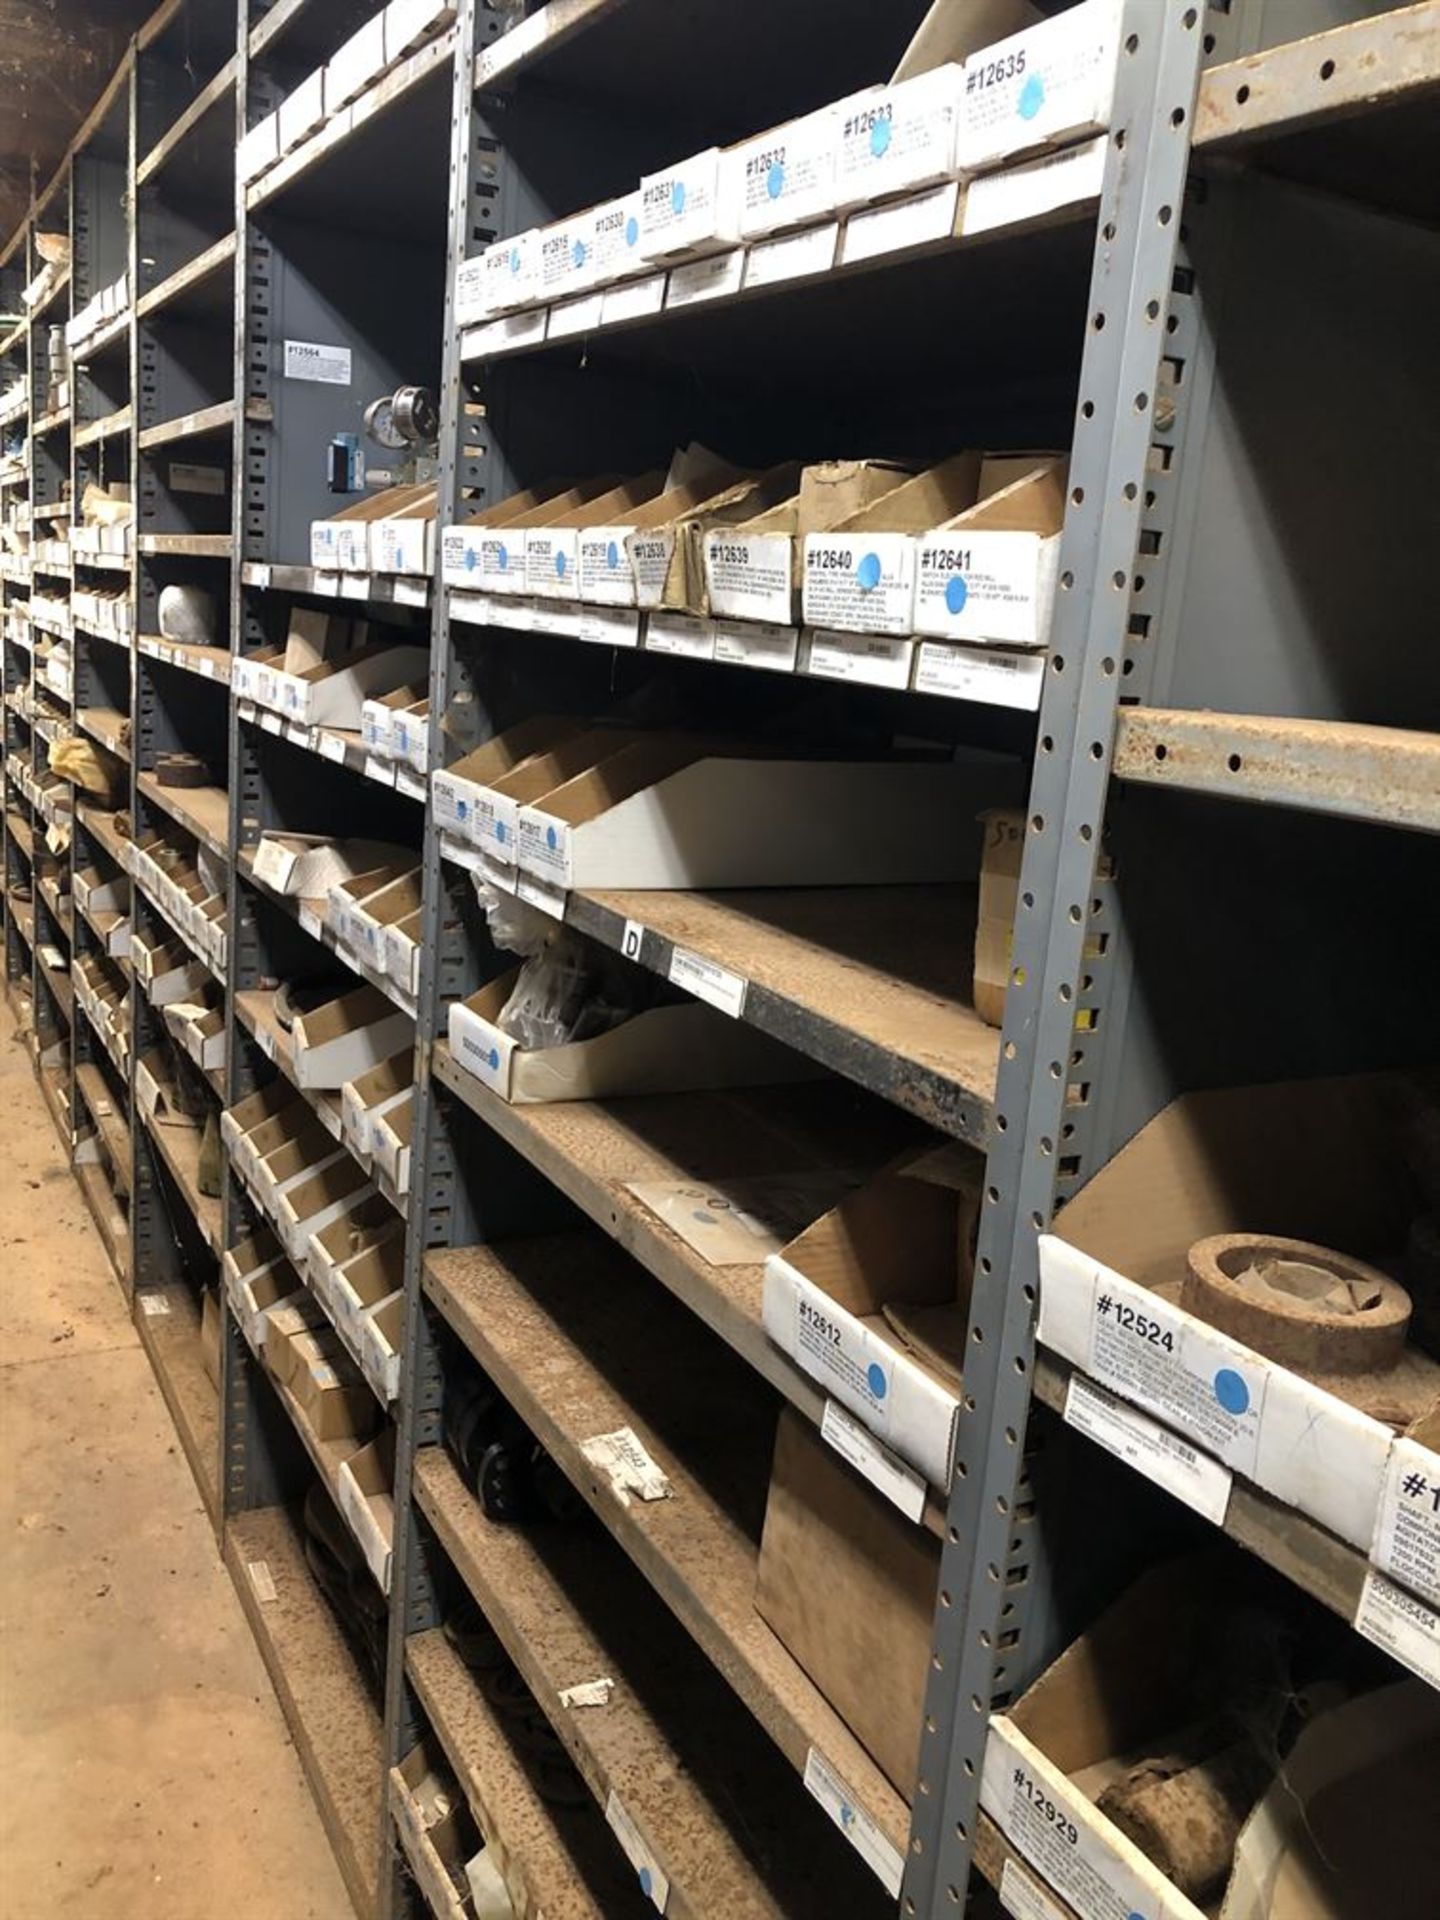 Lot Comprised of (2) Rows of Shelving (Contents Only) Including Valve Components, Electrical - Image 3 of 8